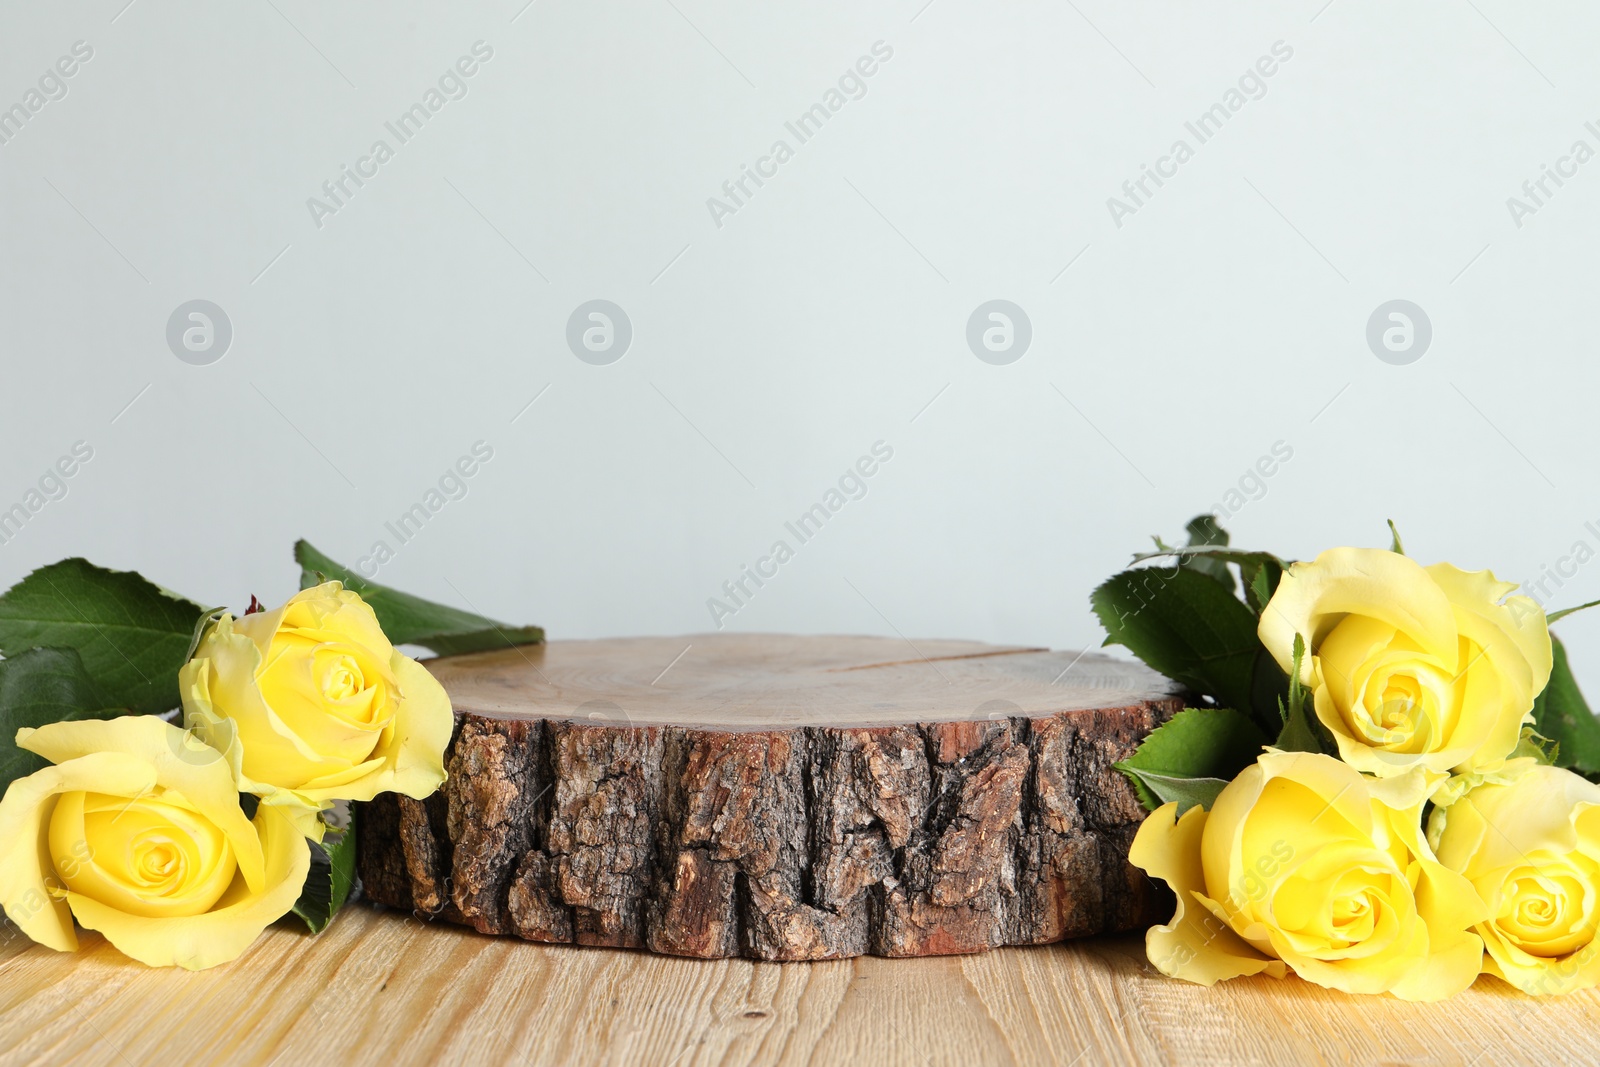 Photo of Beautiful presentation for product. Wooden stump and yellow roses on table against light grey background, space for text